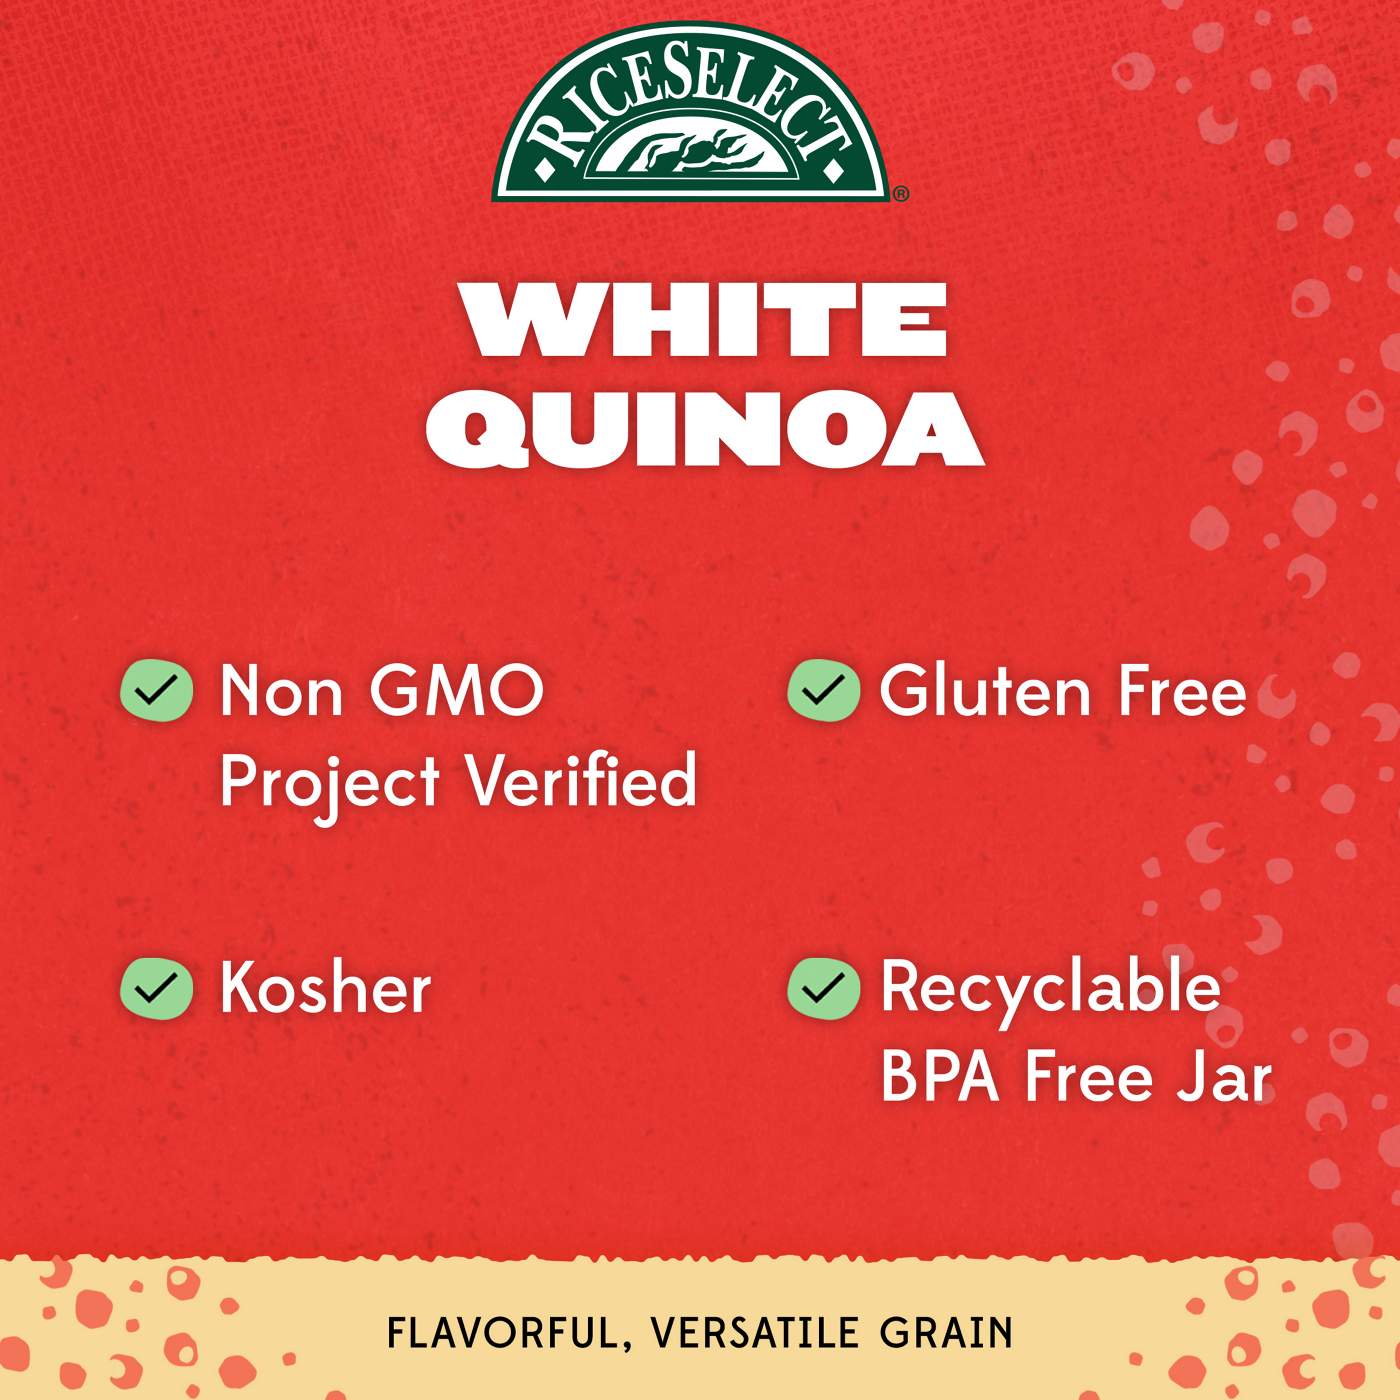 RiceSelect White Quinoa; image 5 of 6